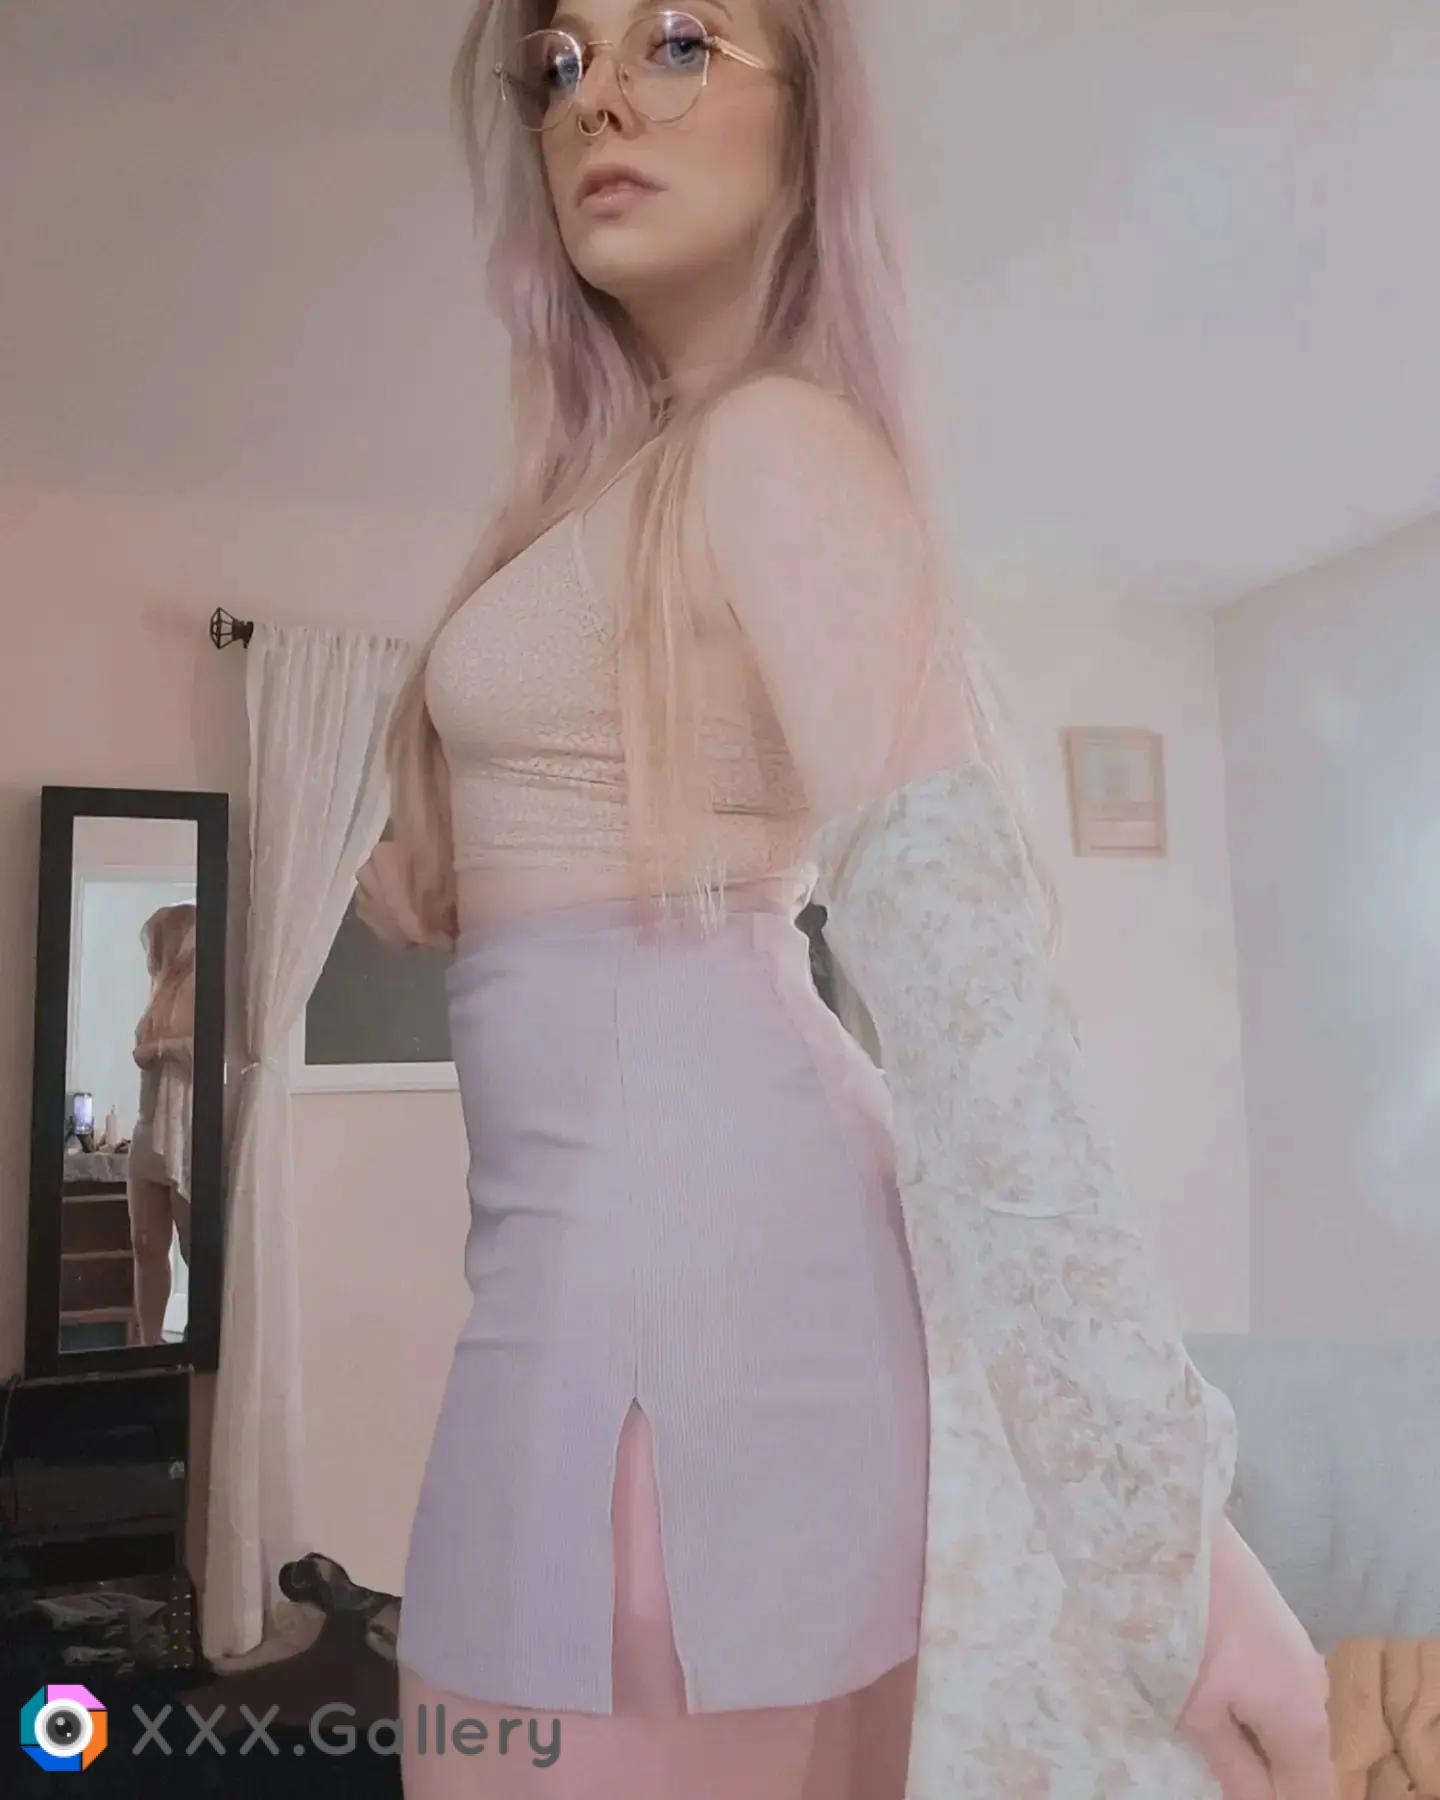 My favorite pastel skirt for a Friday night out with